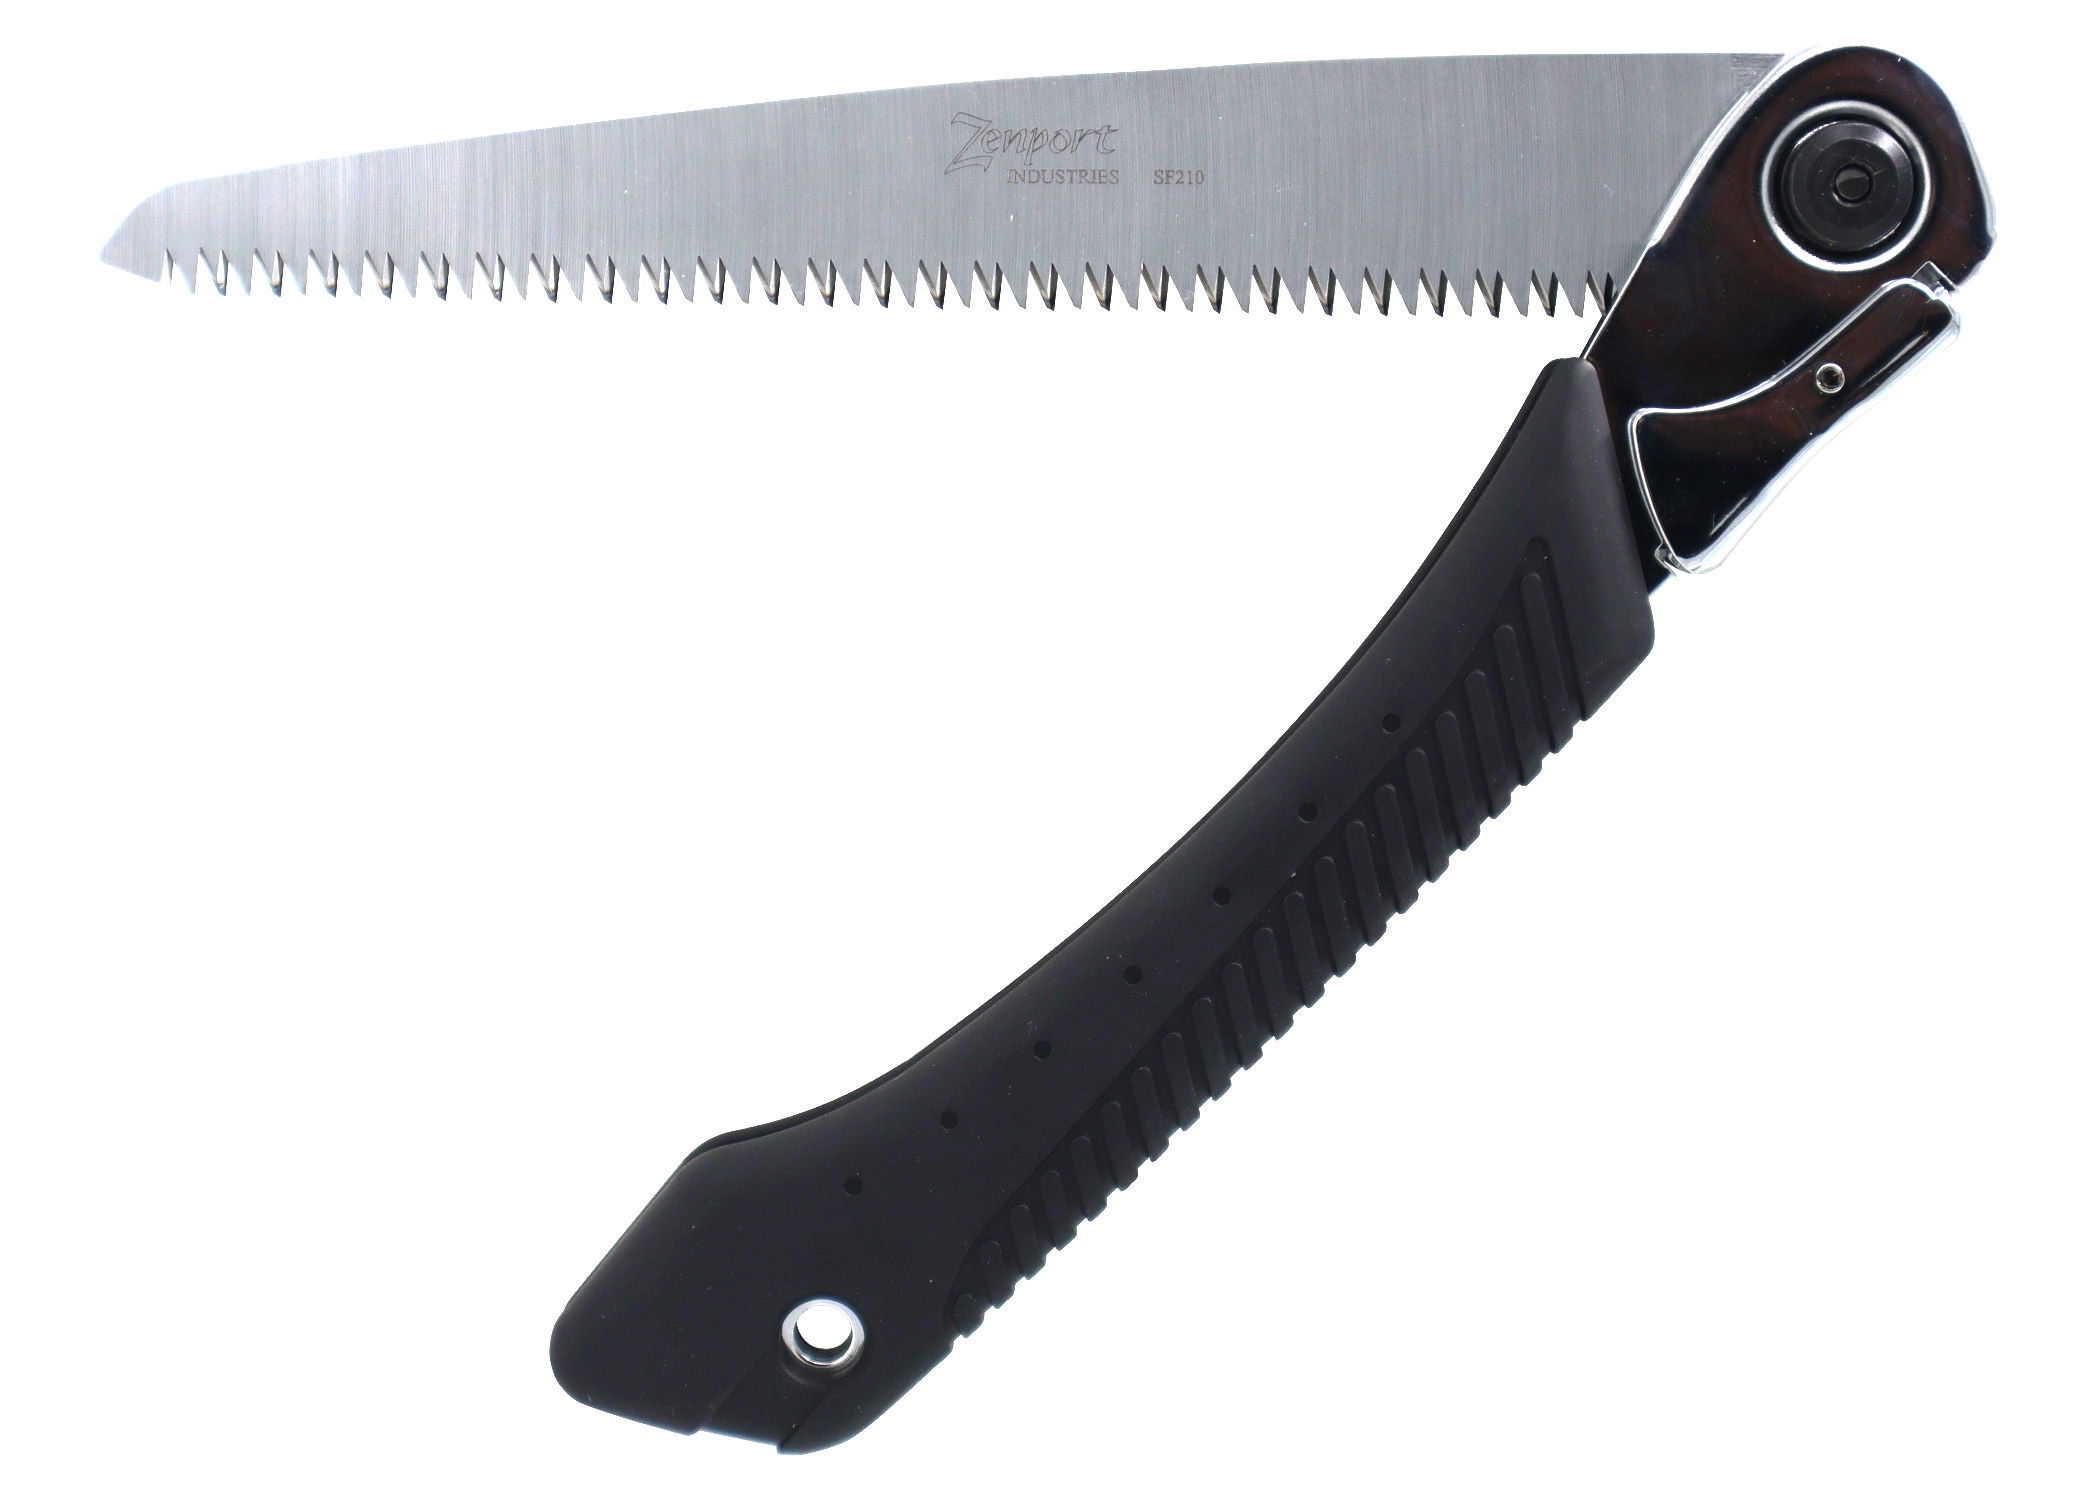 Zenport Saw SF210 8.5 inch Folding Saw, Tri-Edge Blade, Steel Handle - Click Image to Close